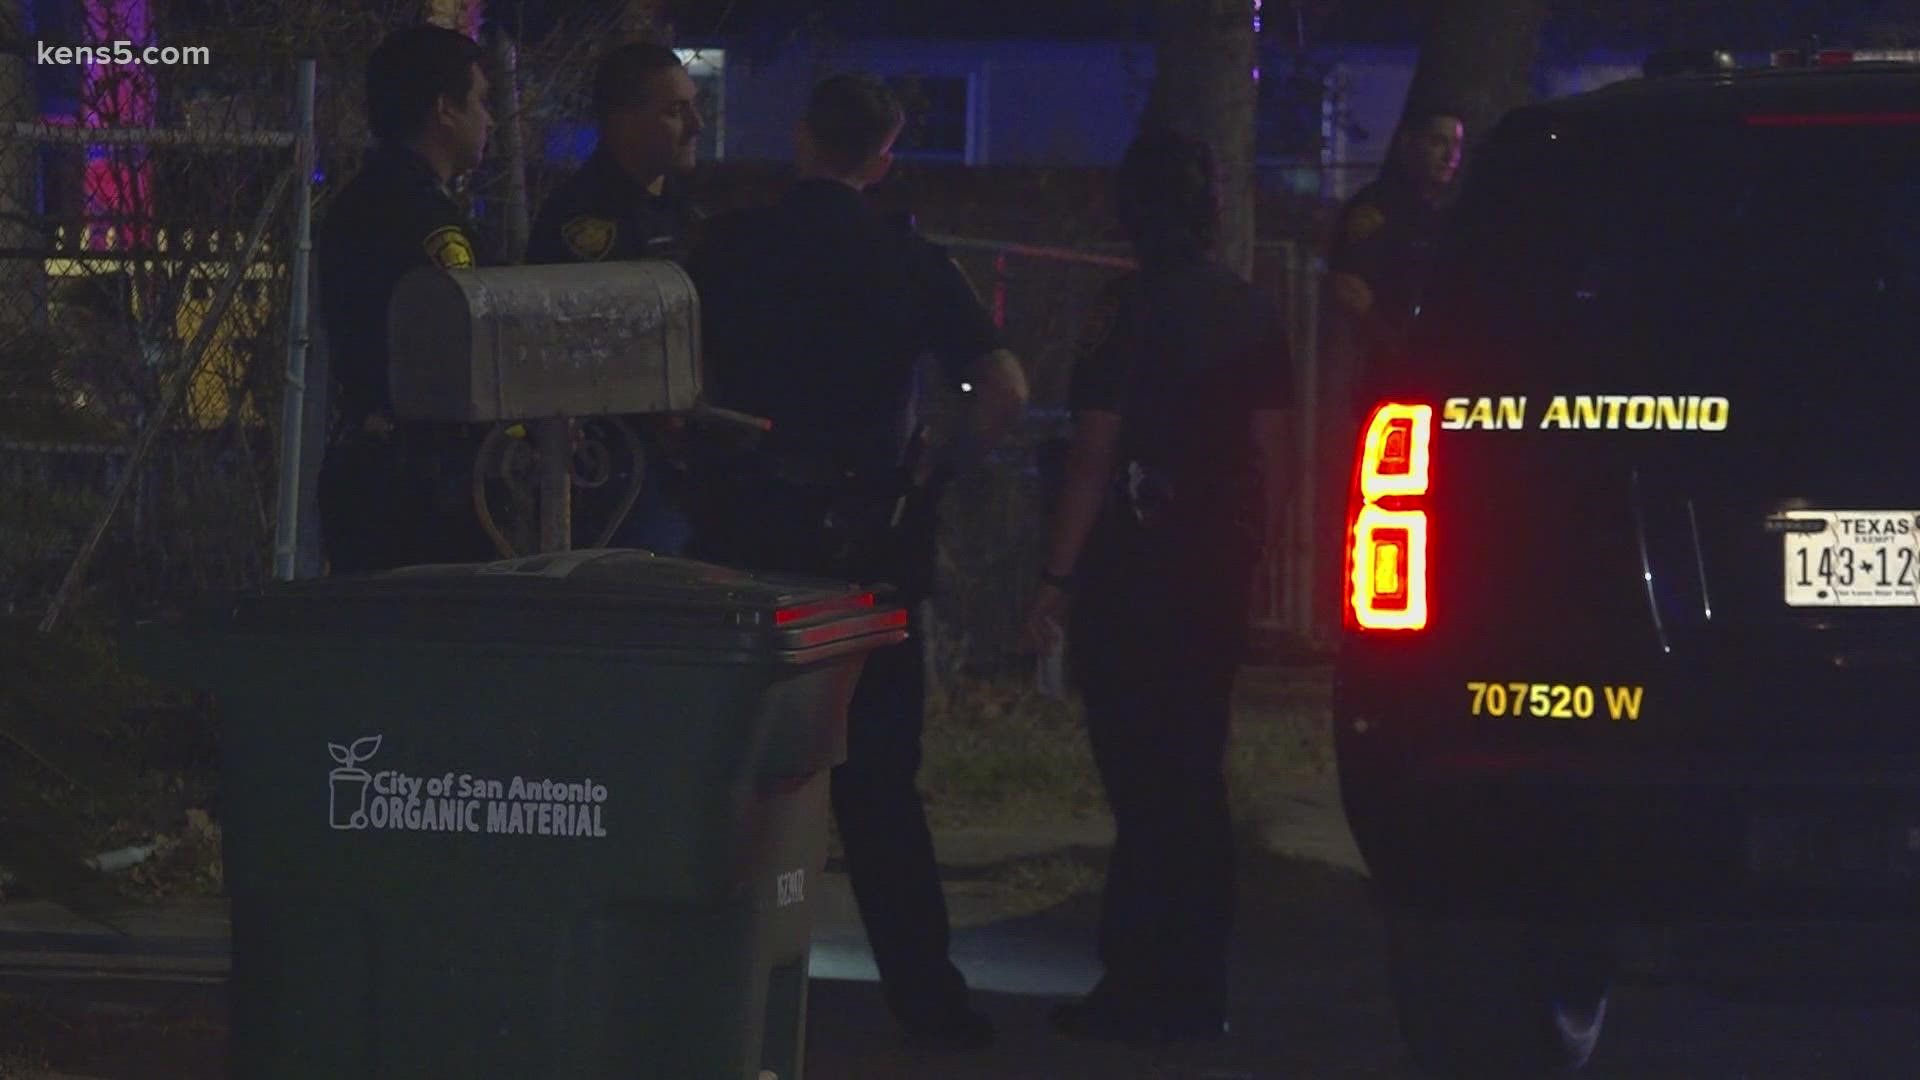 A three-year-old child and an adult male were shot in a drive-by shooting Wednesday night on the west side of San Antonio.